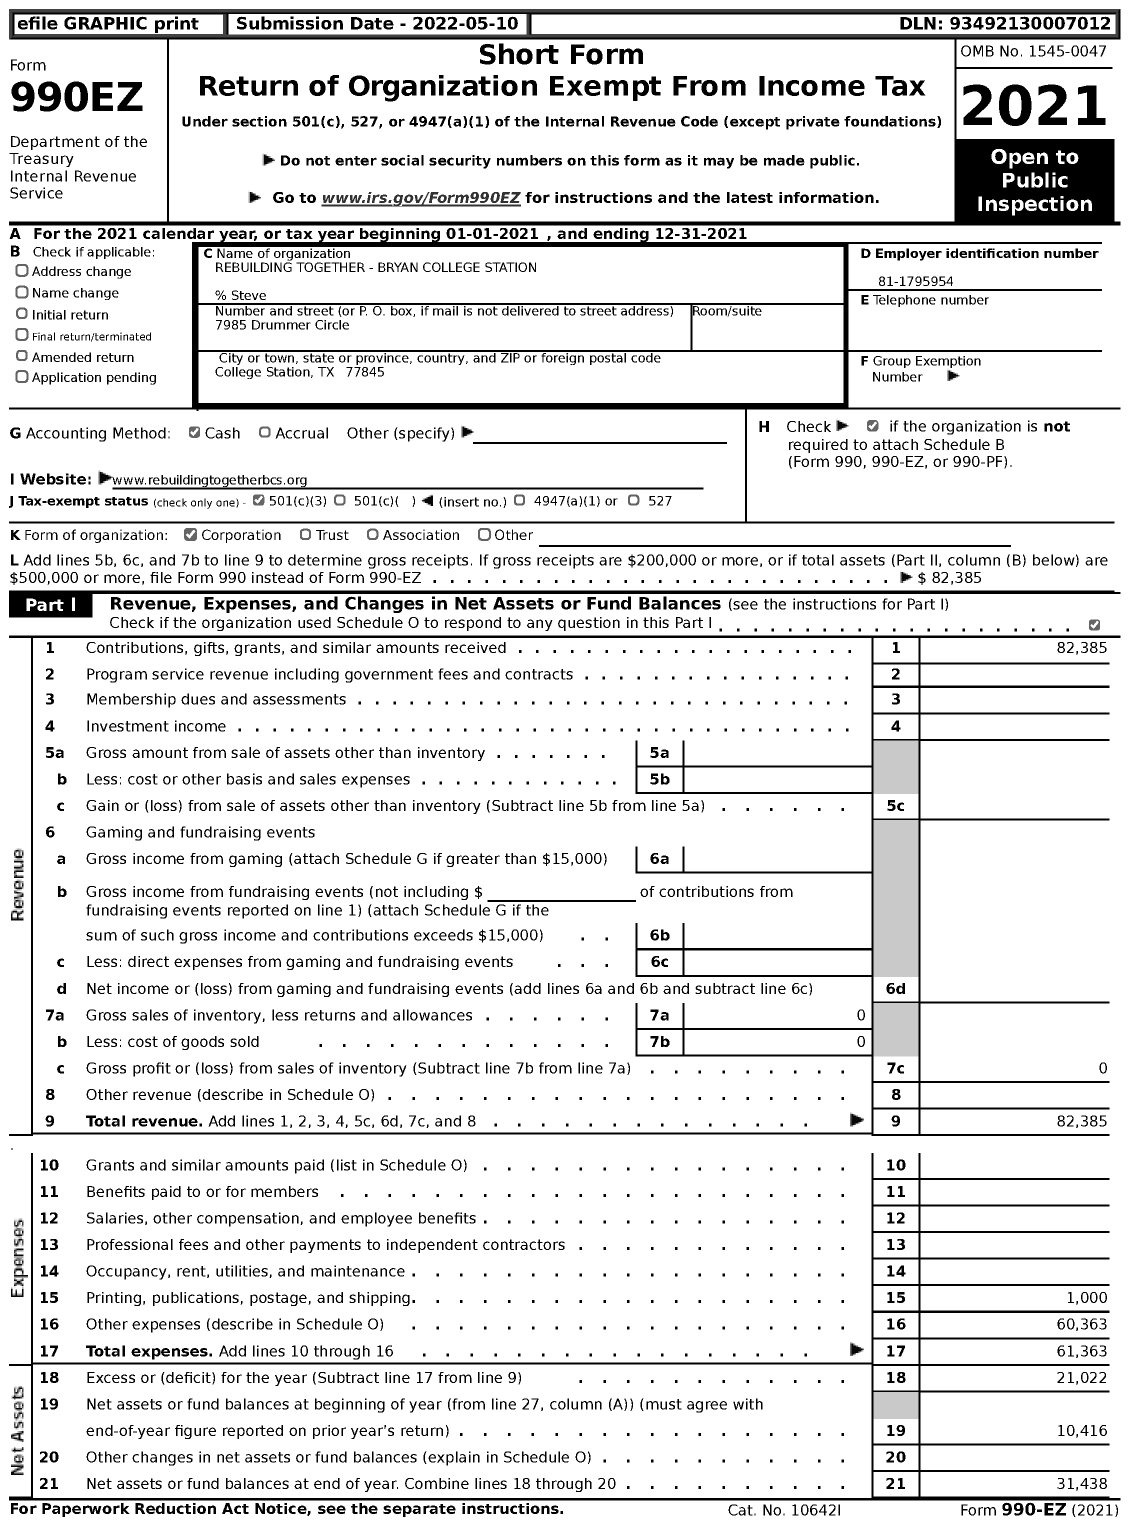 Image of first page of 2021 Form 990EZ for Rebuilding Together - Bryan College Station